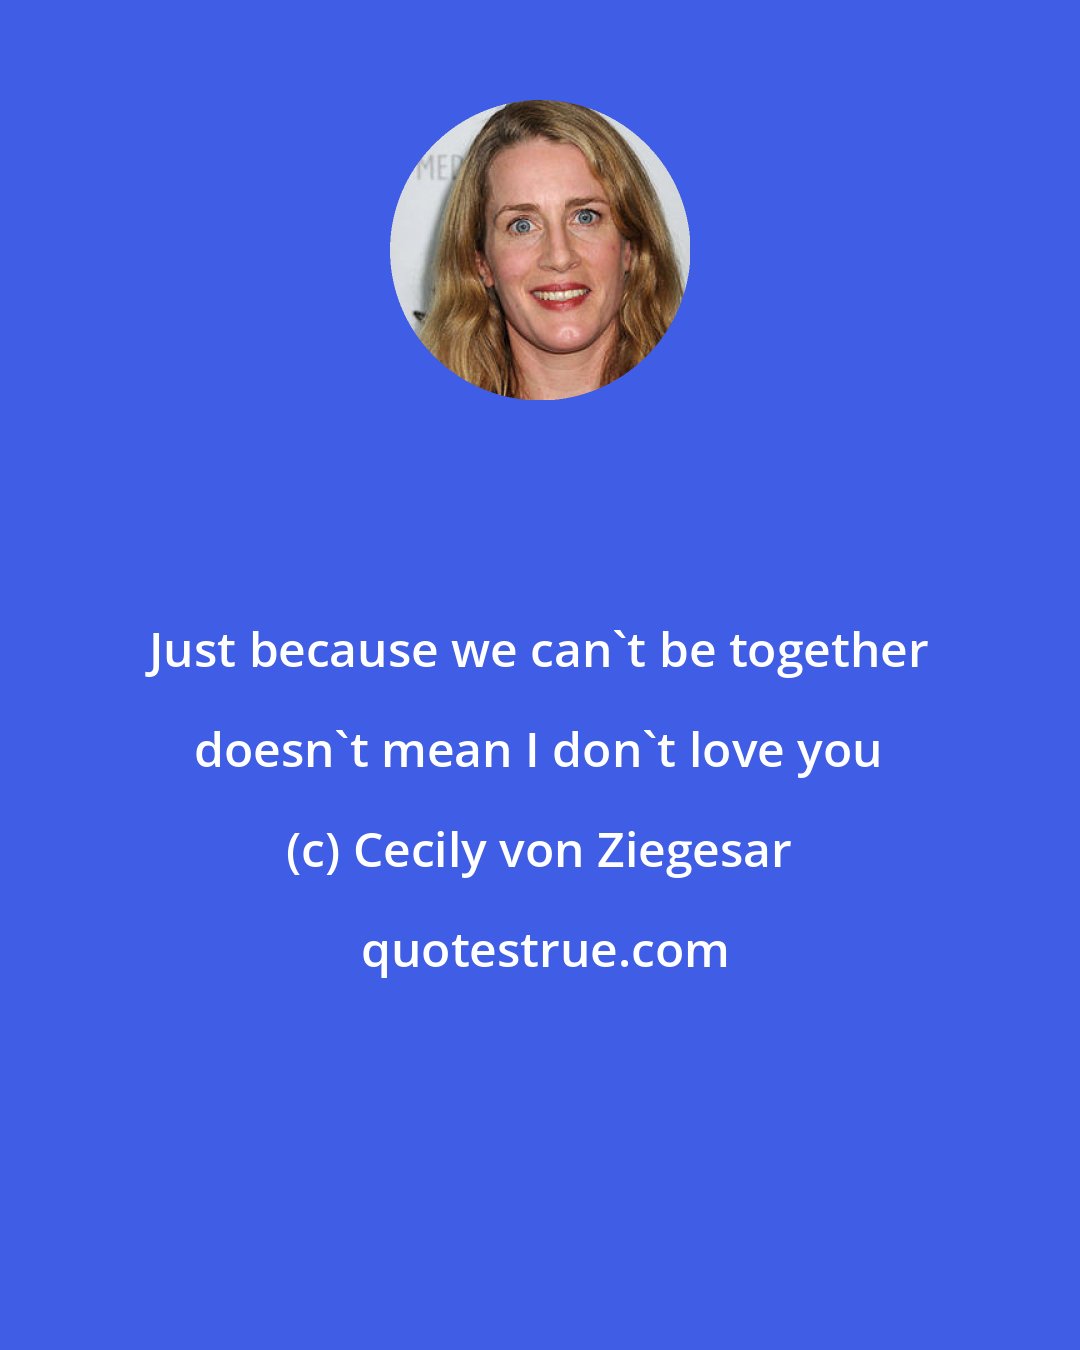 Cecily von Ziegesar: Just because we can't be together doesn't mean I don't love you